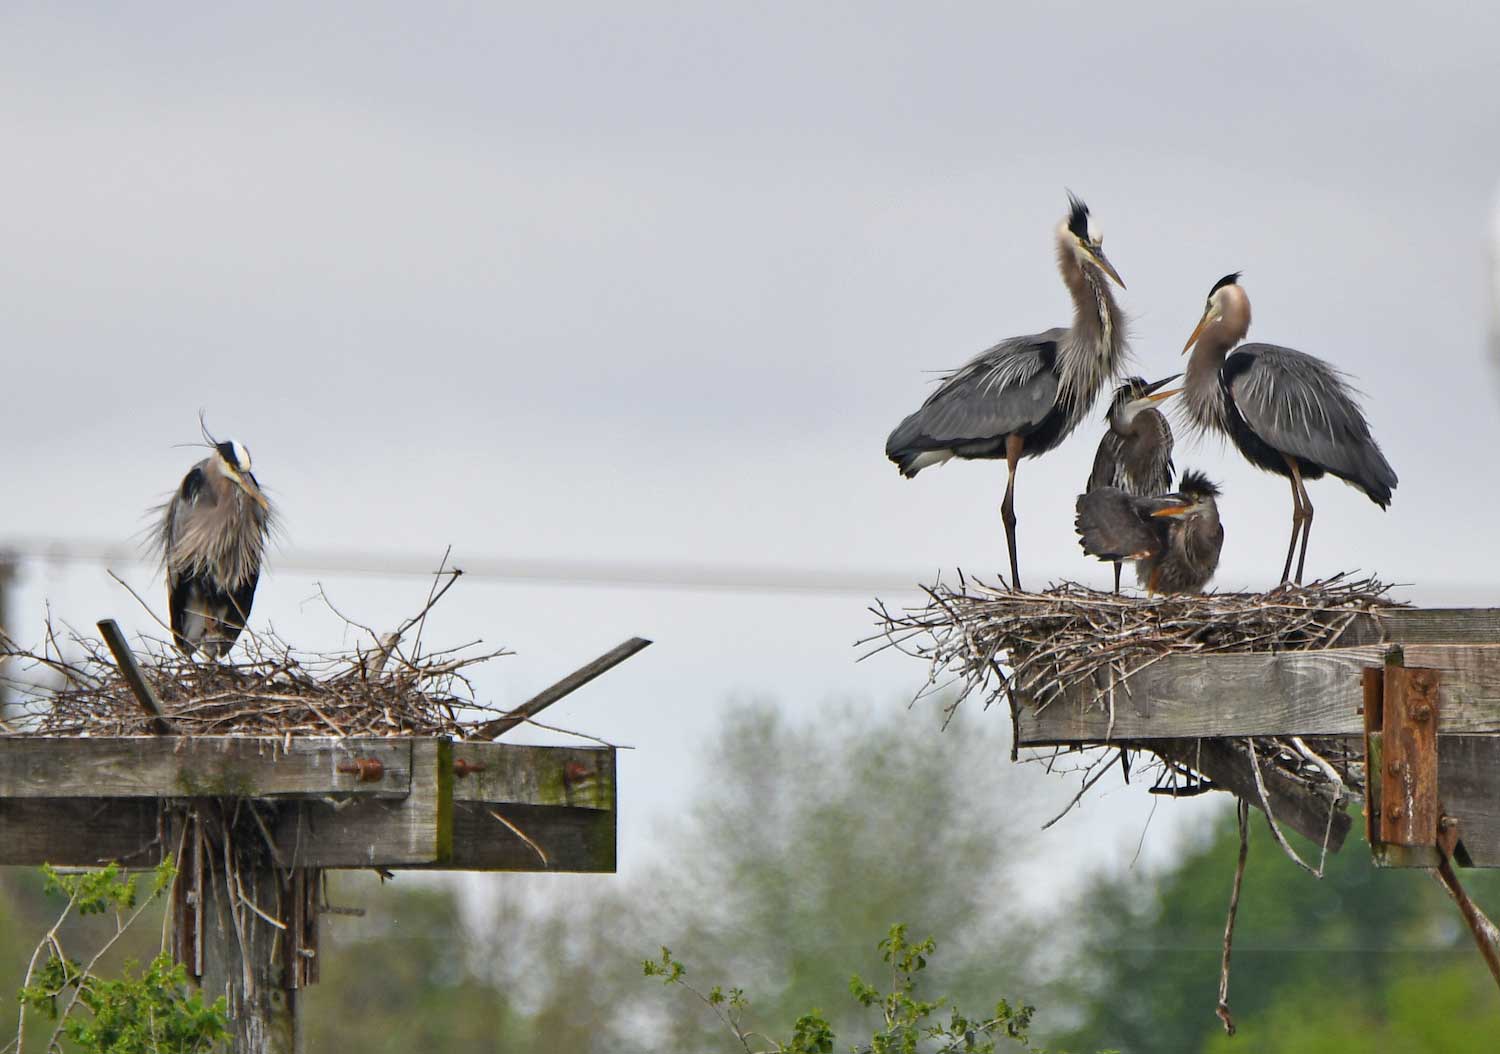 A group of five great blue herons perched atop nesting platforms.